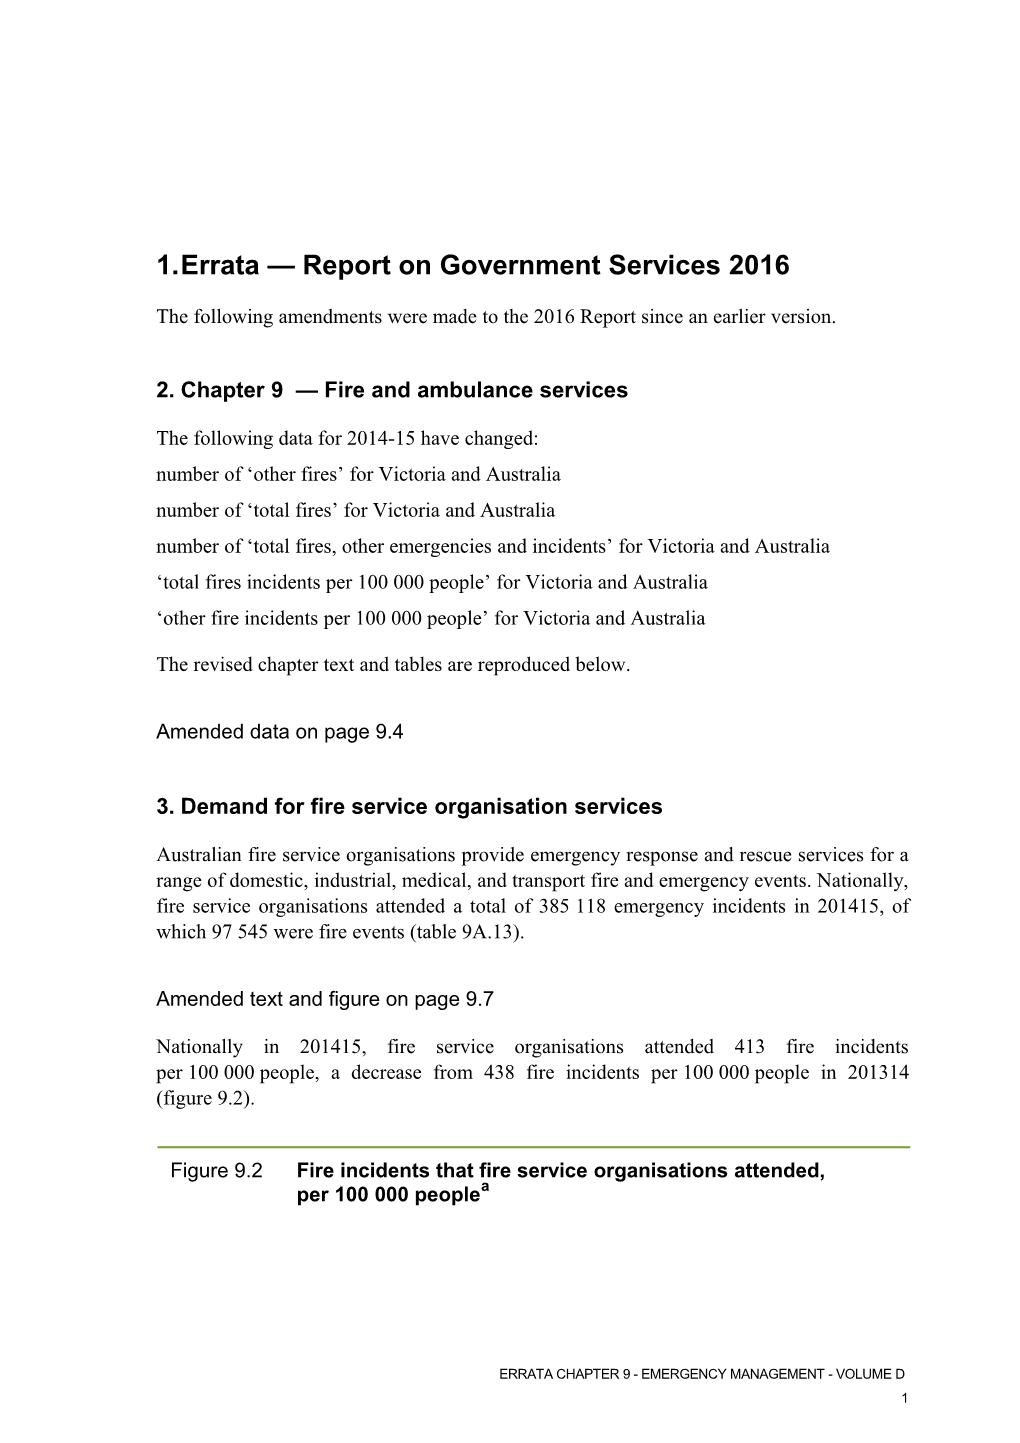 Errata Chapter 9 - Emergency Management Volume D - Report on Government Services 2016